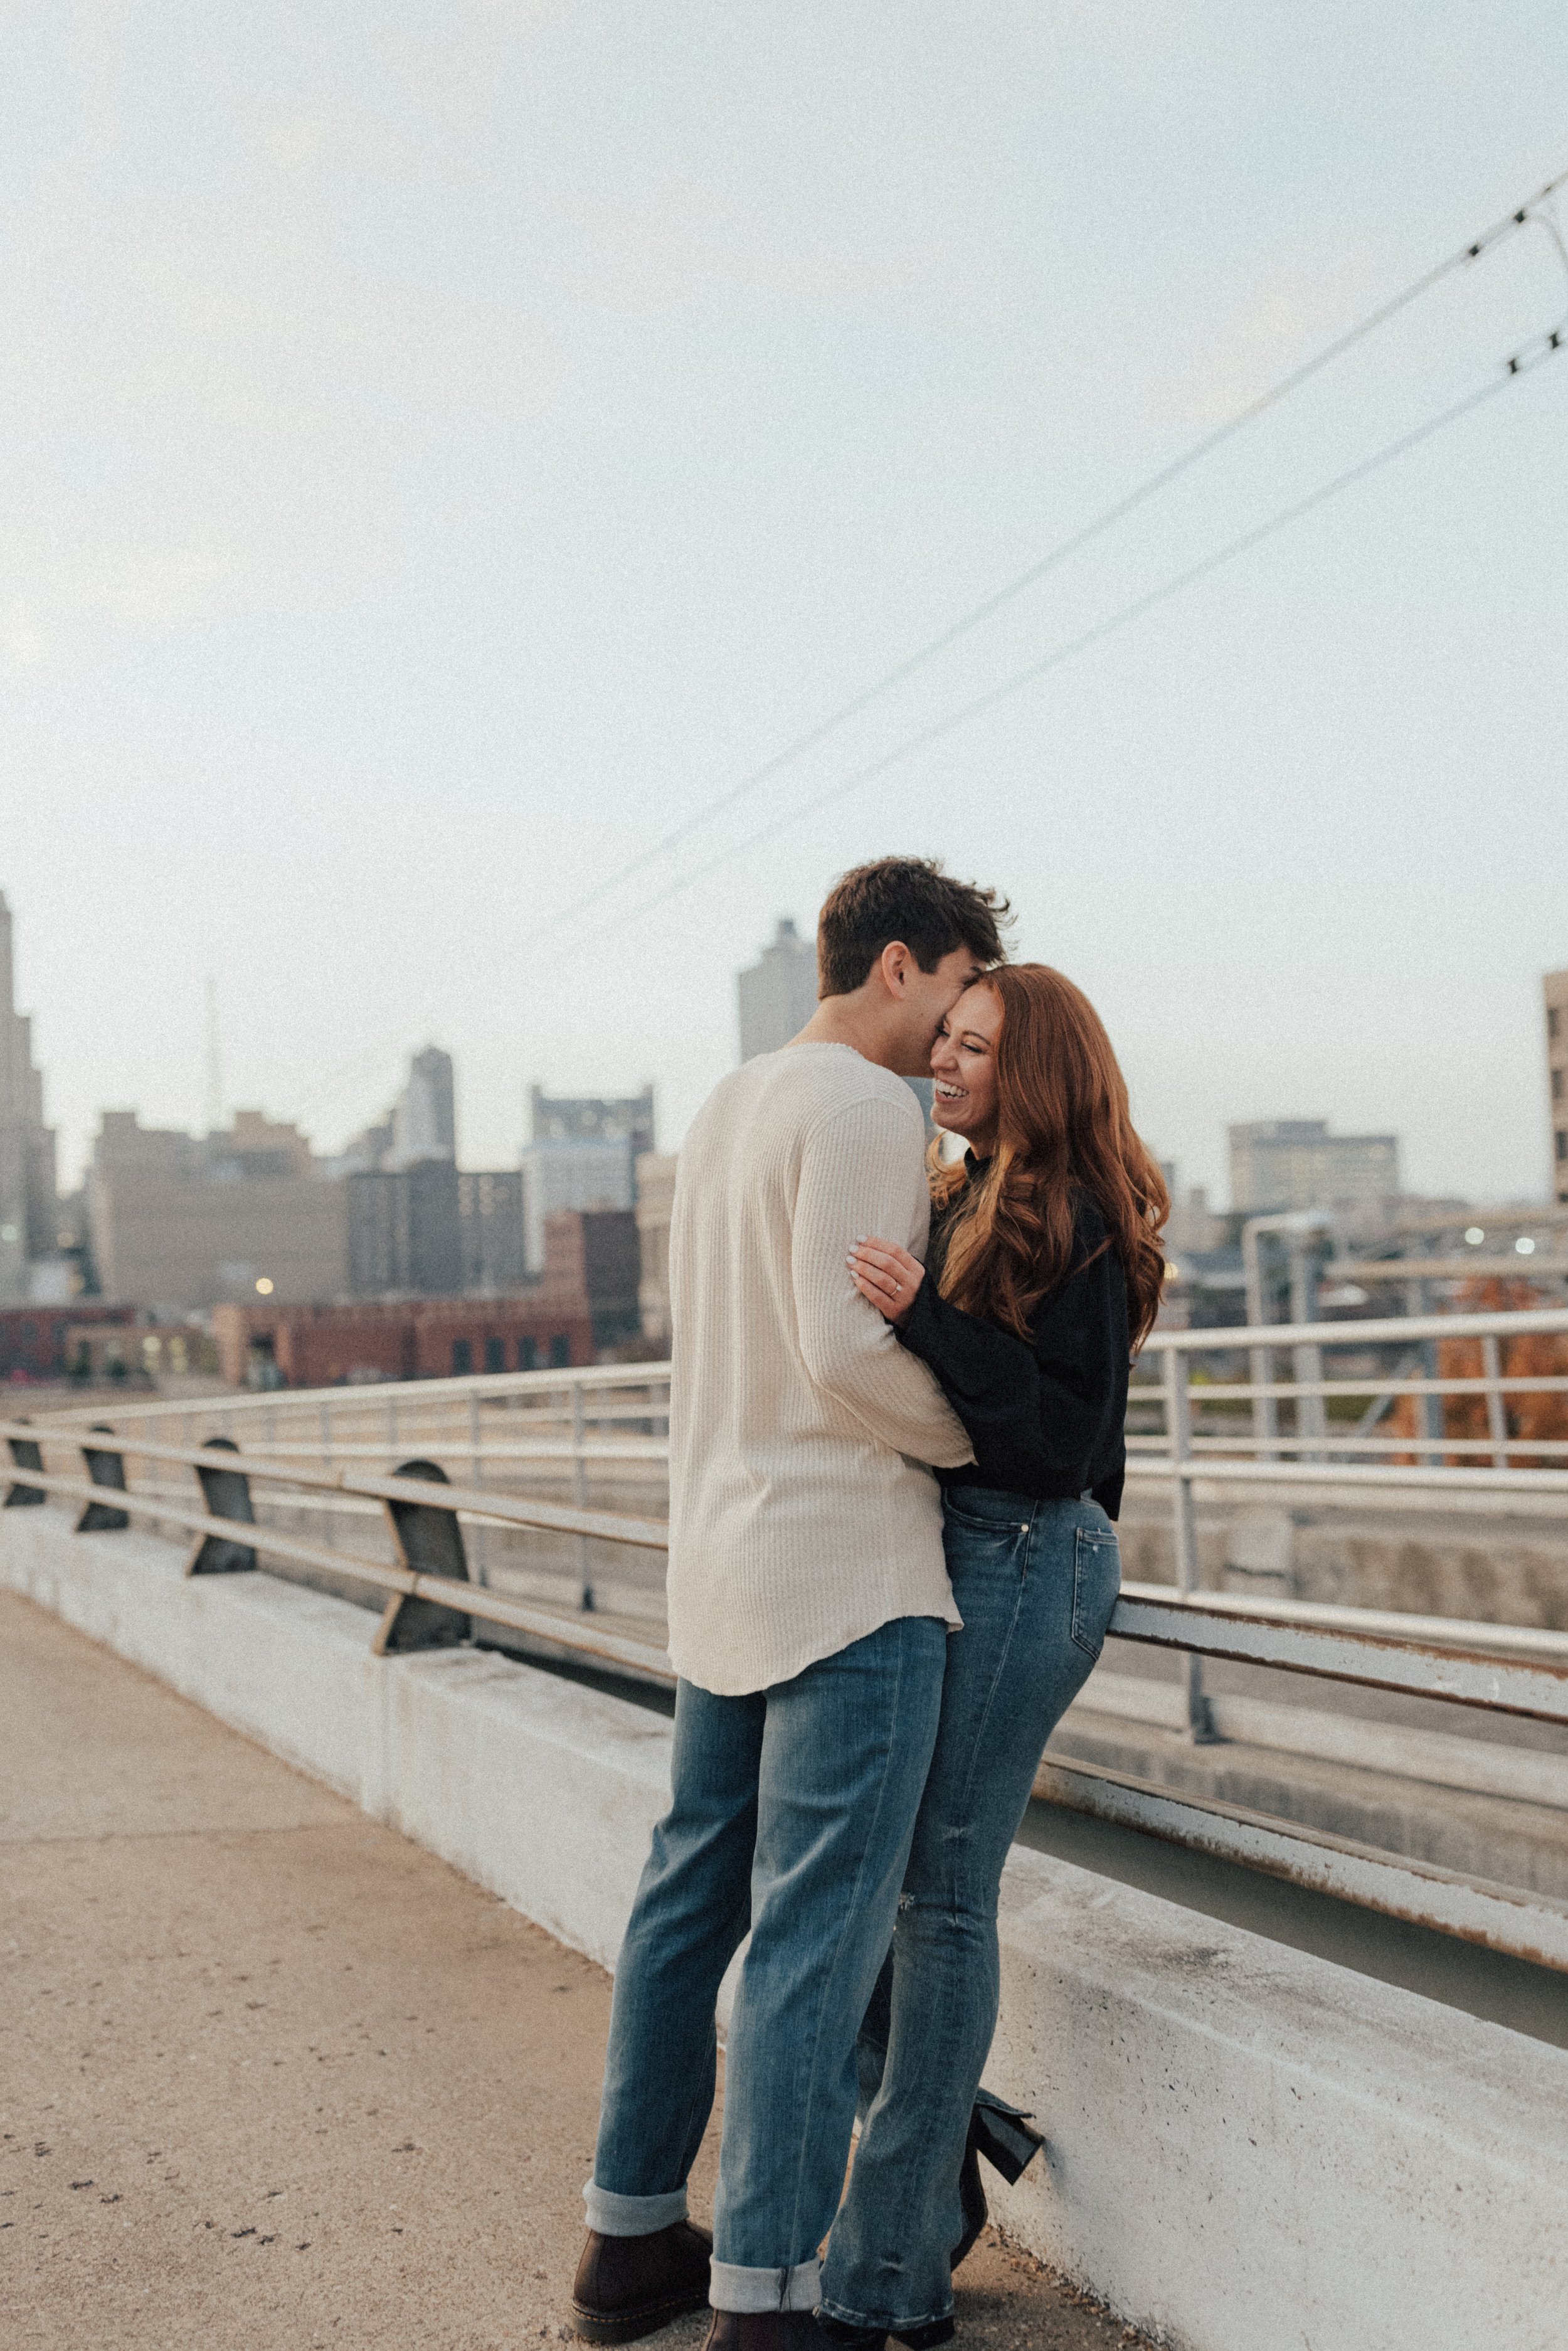 jill-and-jeffrey-winter-engagement-session-hotel-napoleon-courthouse-downtown-memphis-arkansas-tennessee-wedding-photographer-jo-darling-photography-153.jpg